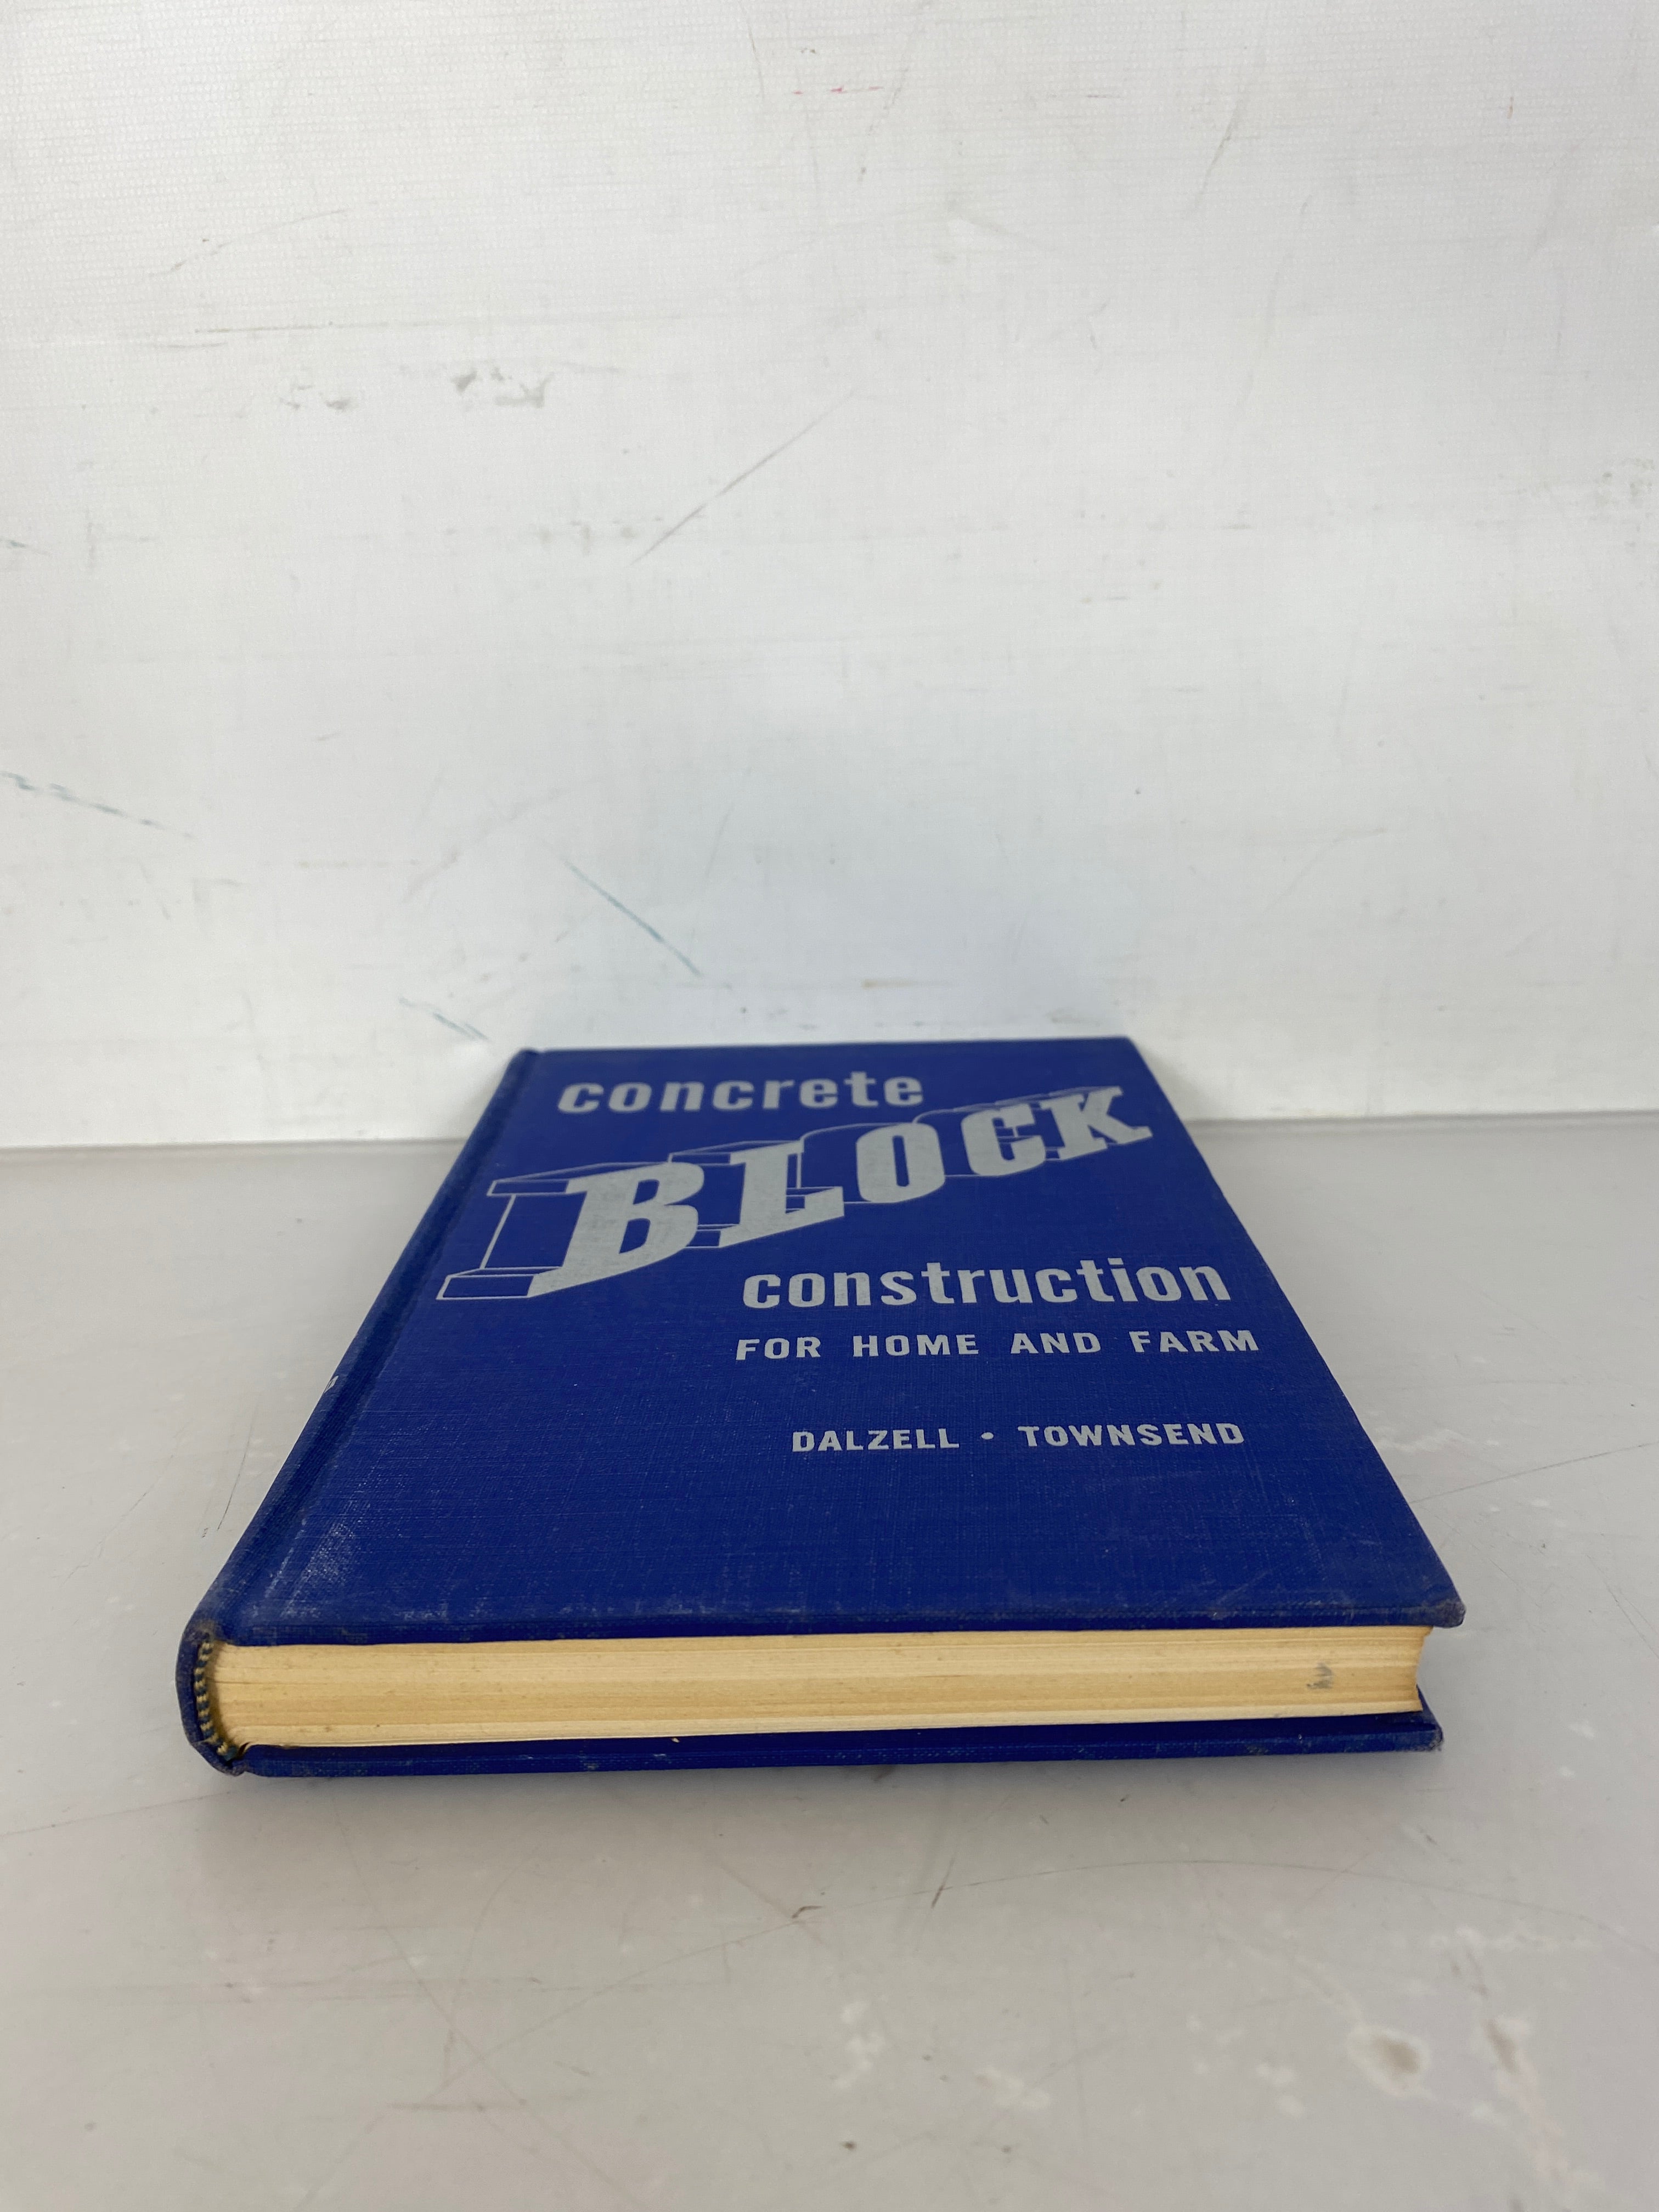 Lot of 2 Building Books: How to Plan a House (1961) and Concrete Block Construction (1953-1st) by Townsend and Dalzell HC DJ